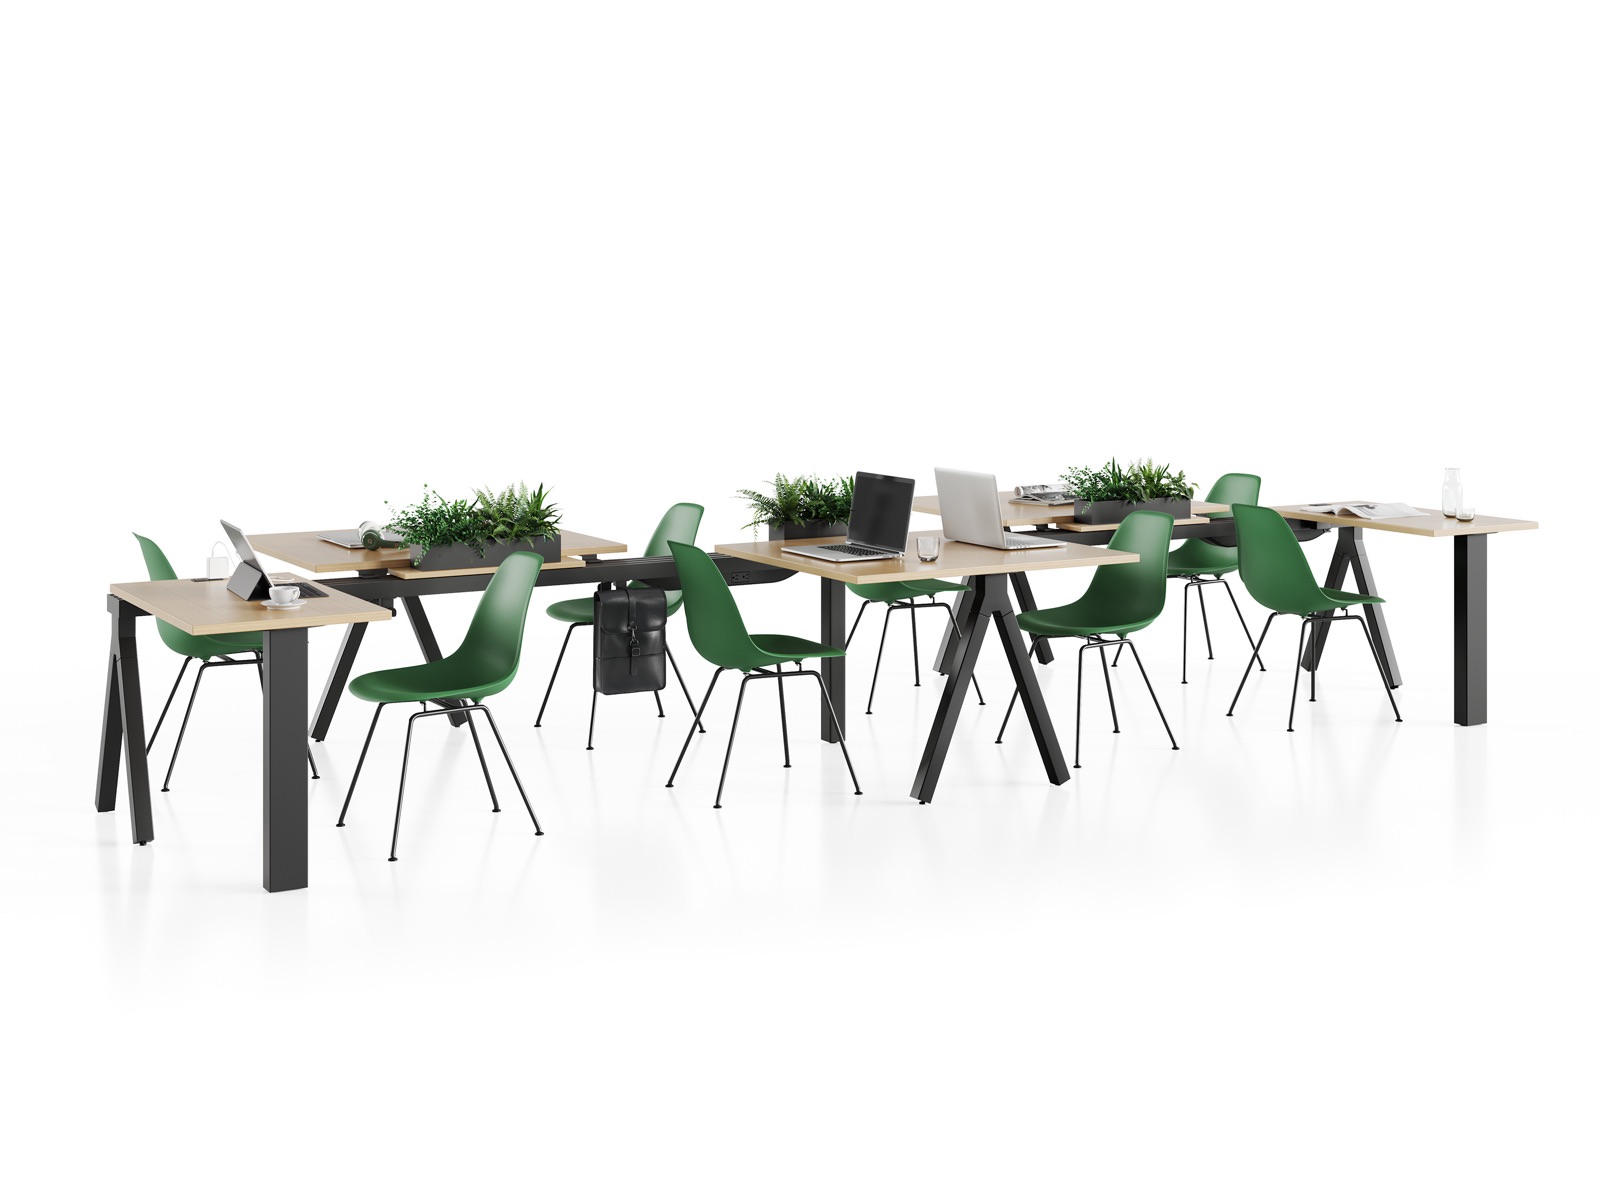 Black and oak on ash Canvas Vista cafe setting with green Eames Molded Plastic Chairs and foliage.